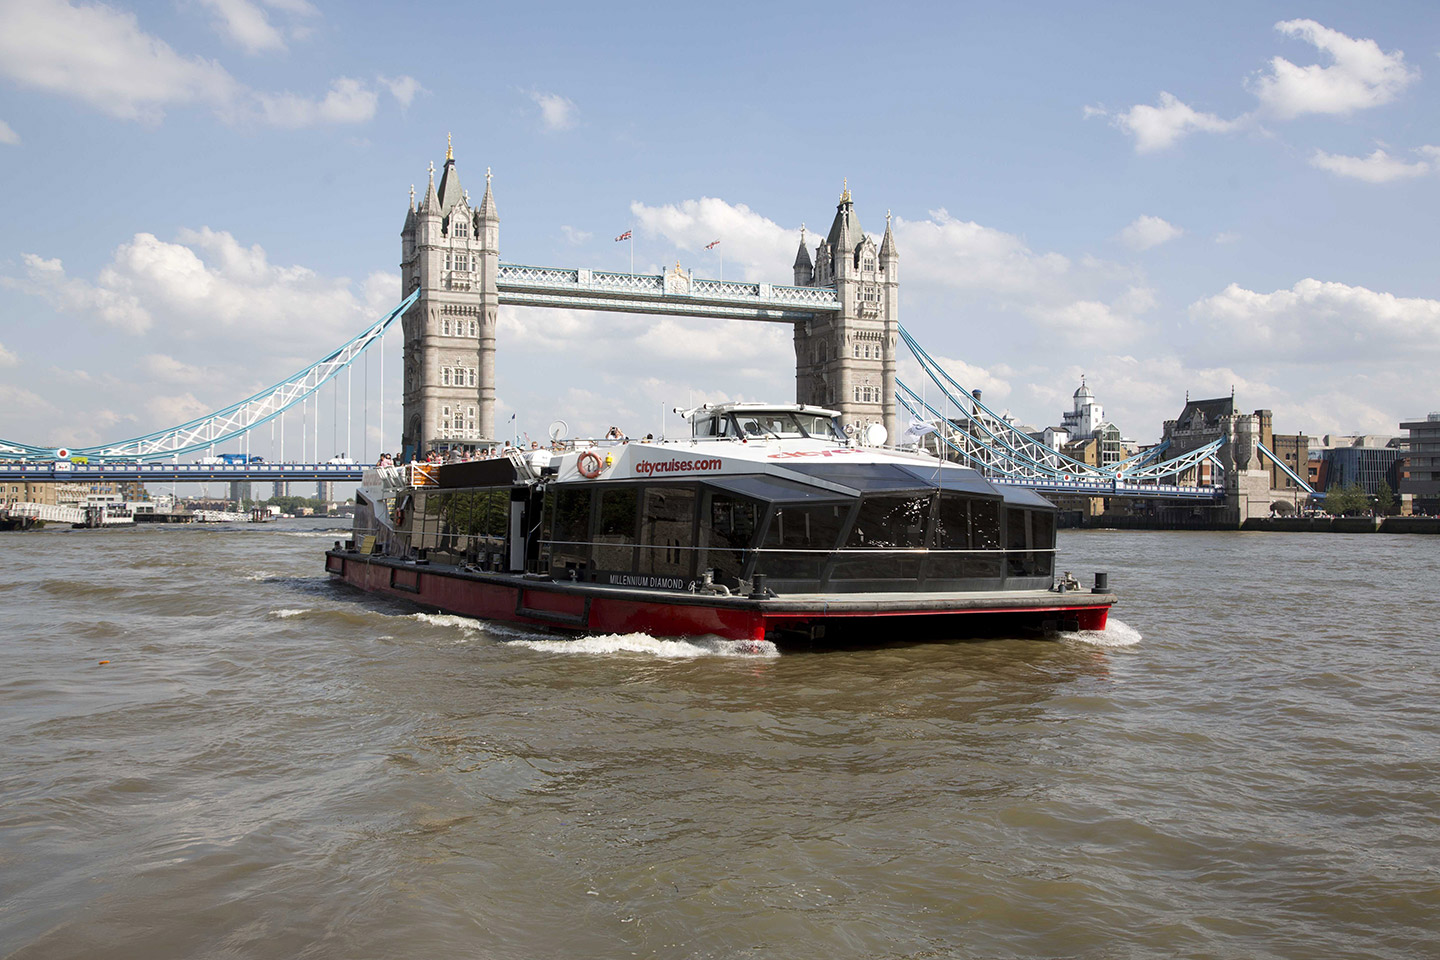 thames boat cruises & events incorporating mainstream leisure